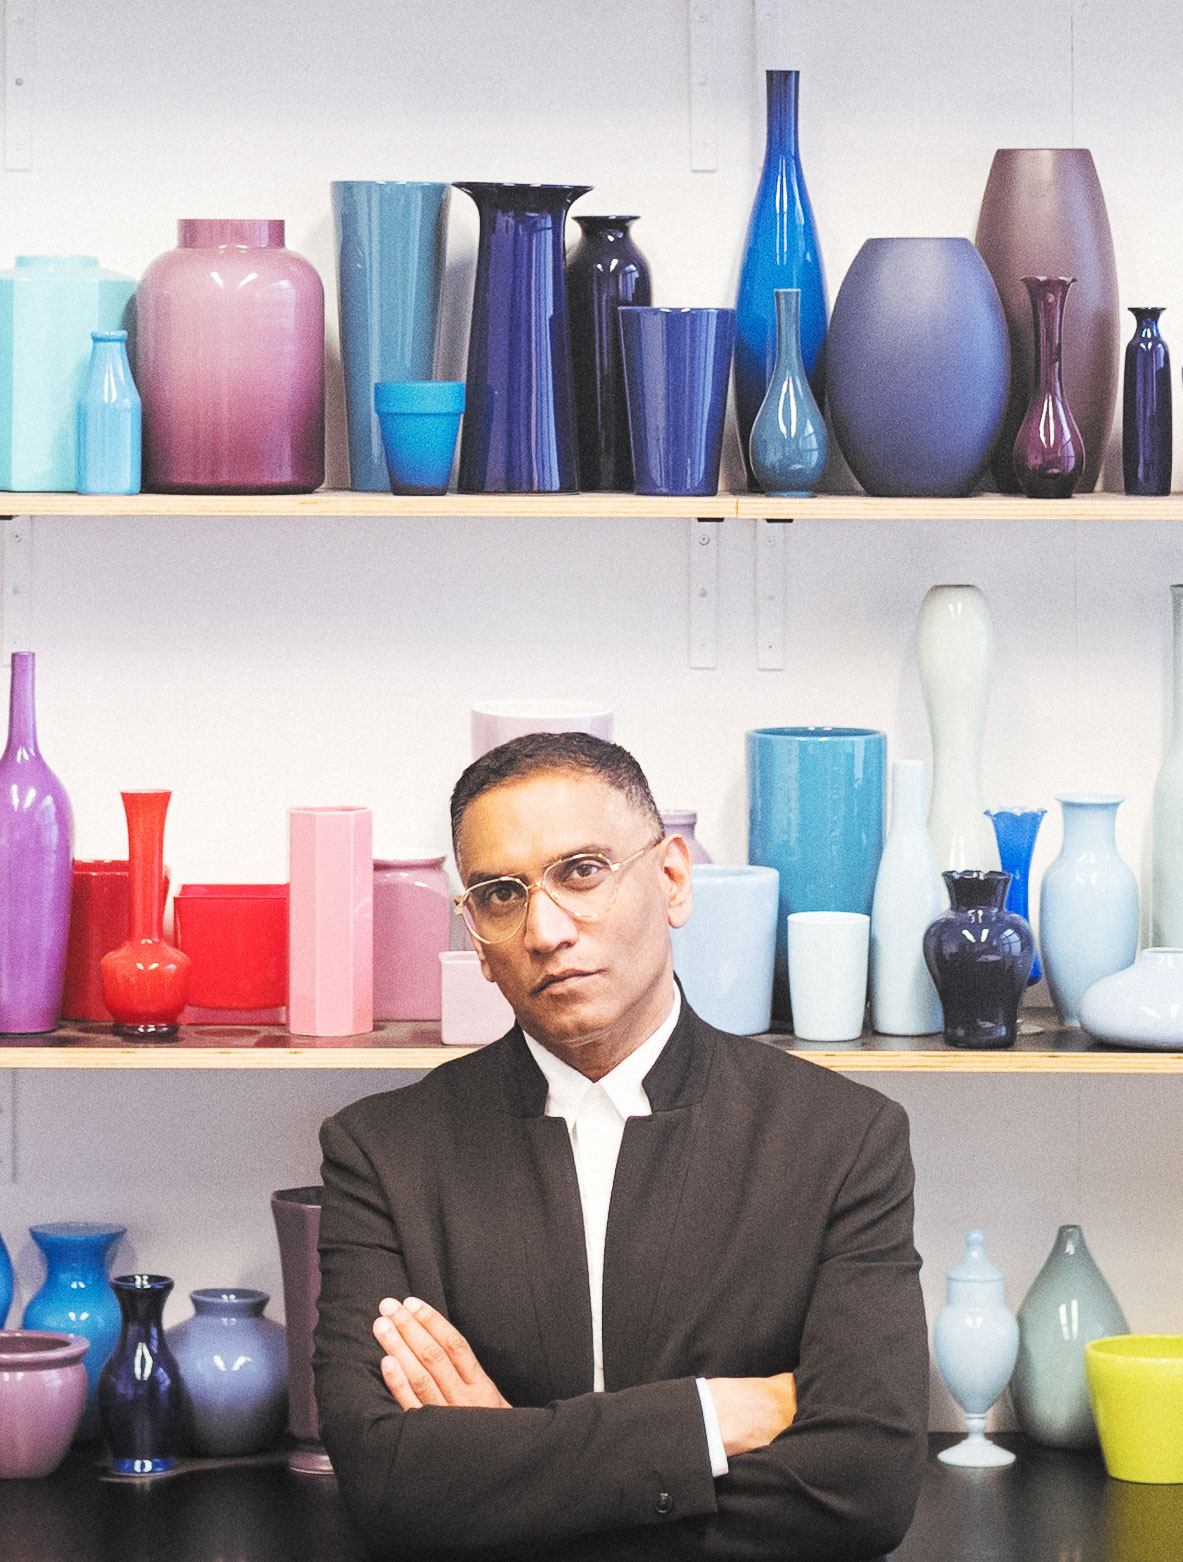 Portrait of artist David Sequiera standing in front of shelves lined up with colourful ceramics and glassware